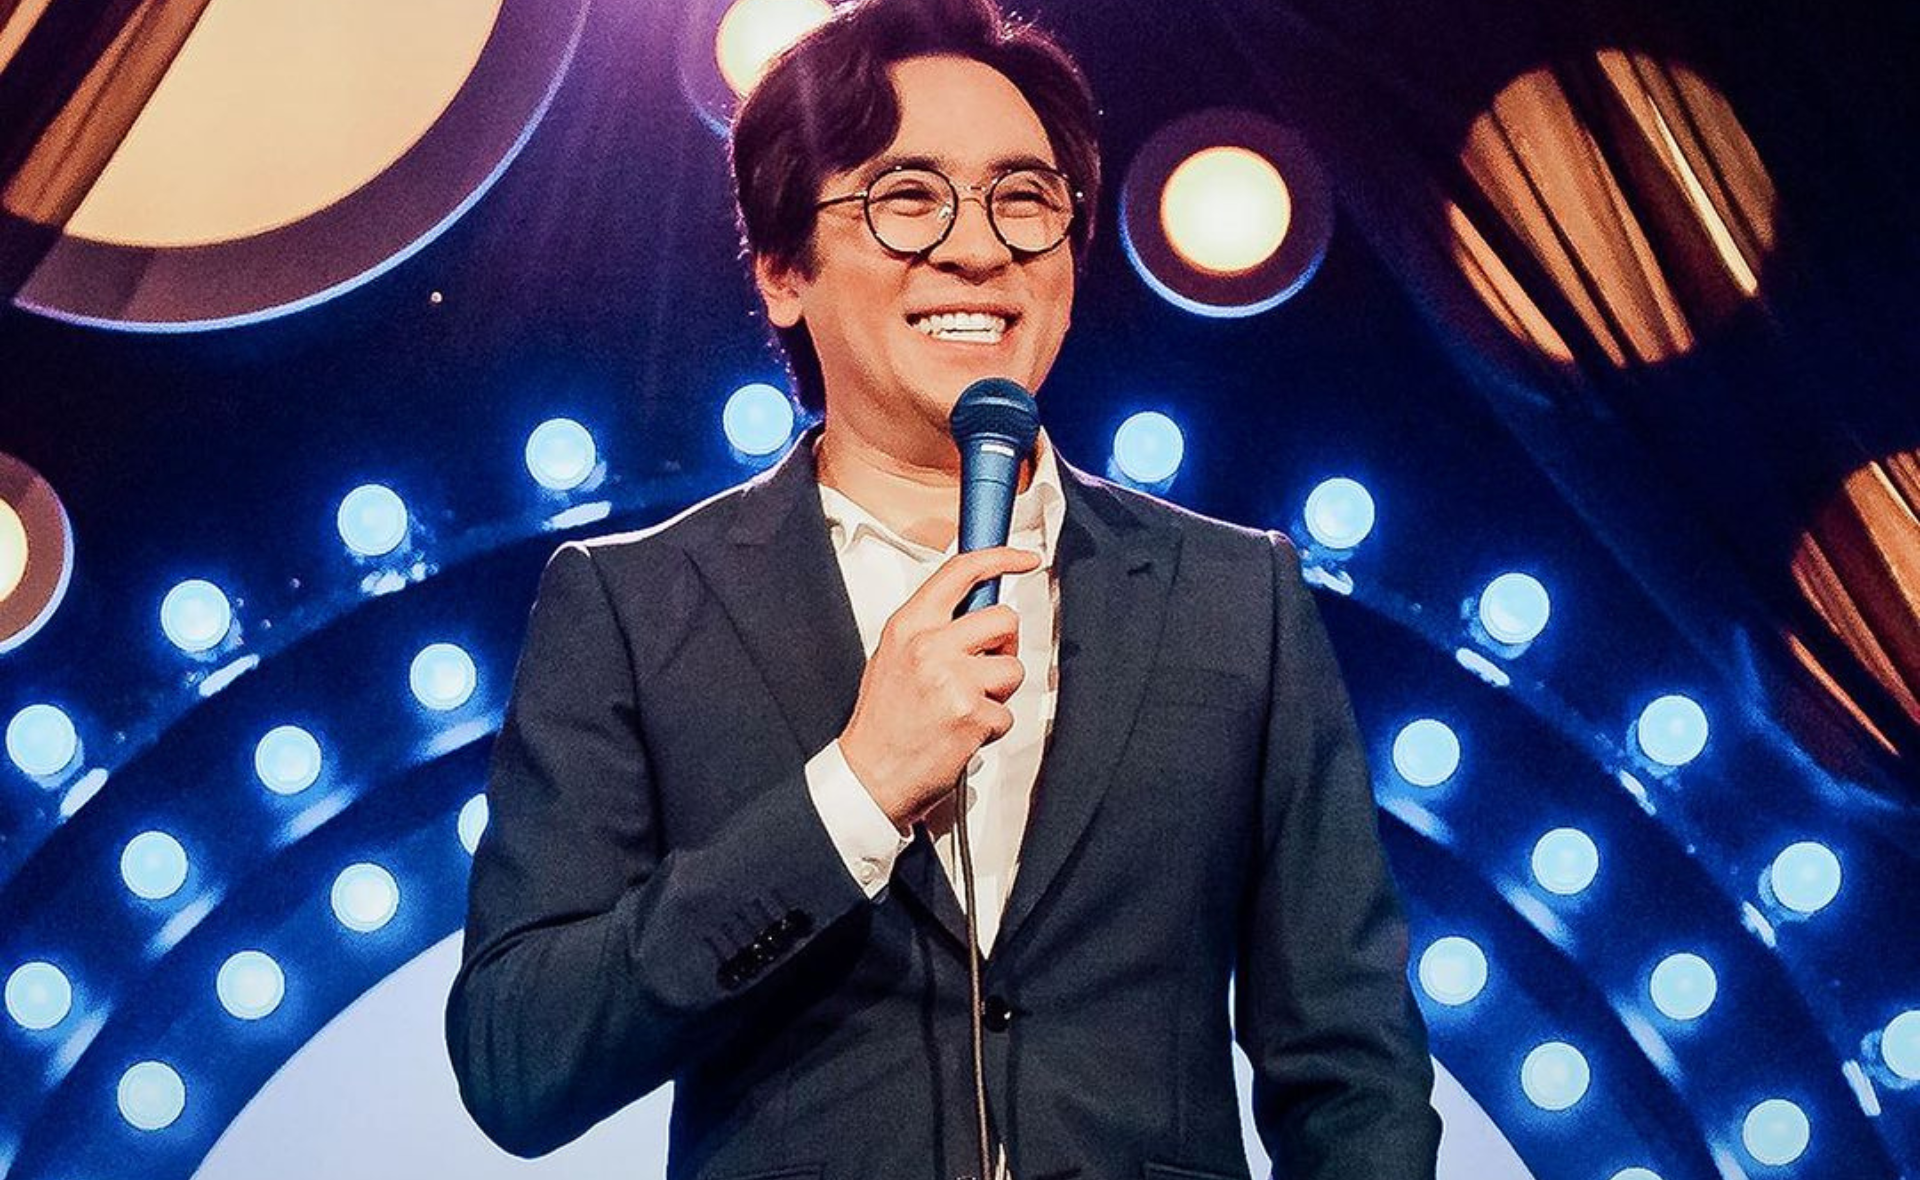 “Failed, proposal, disaster”: Catch Michael Hing’s new hilarious comedy special Long Live The Hing